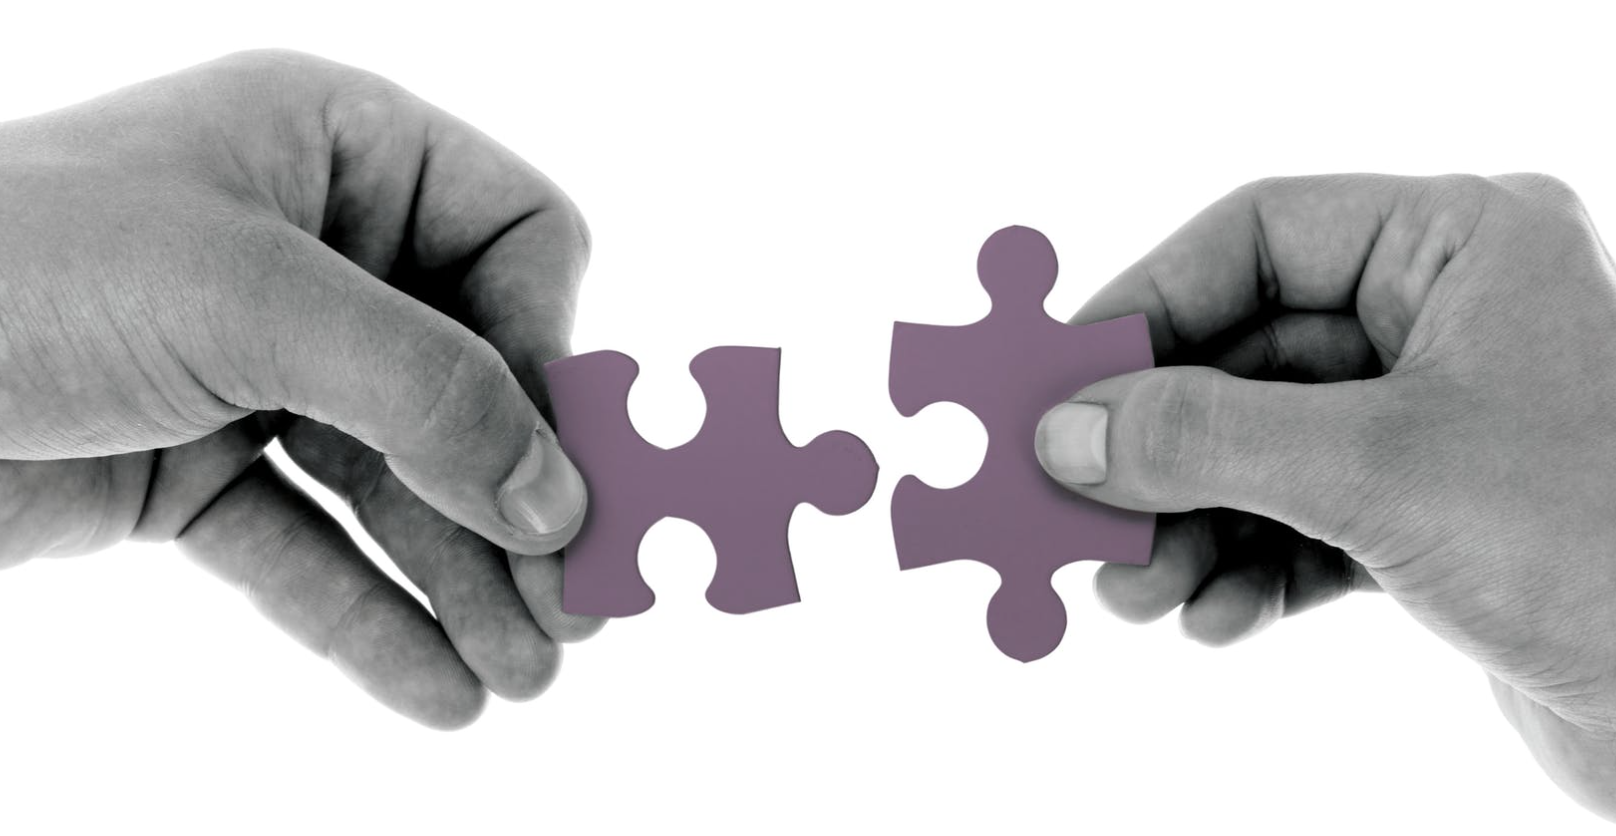 make the puzzle complete partnership